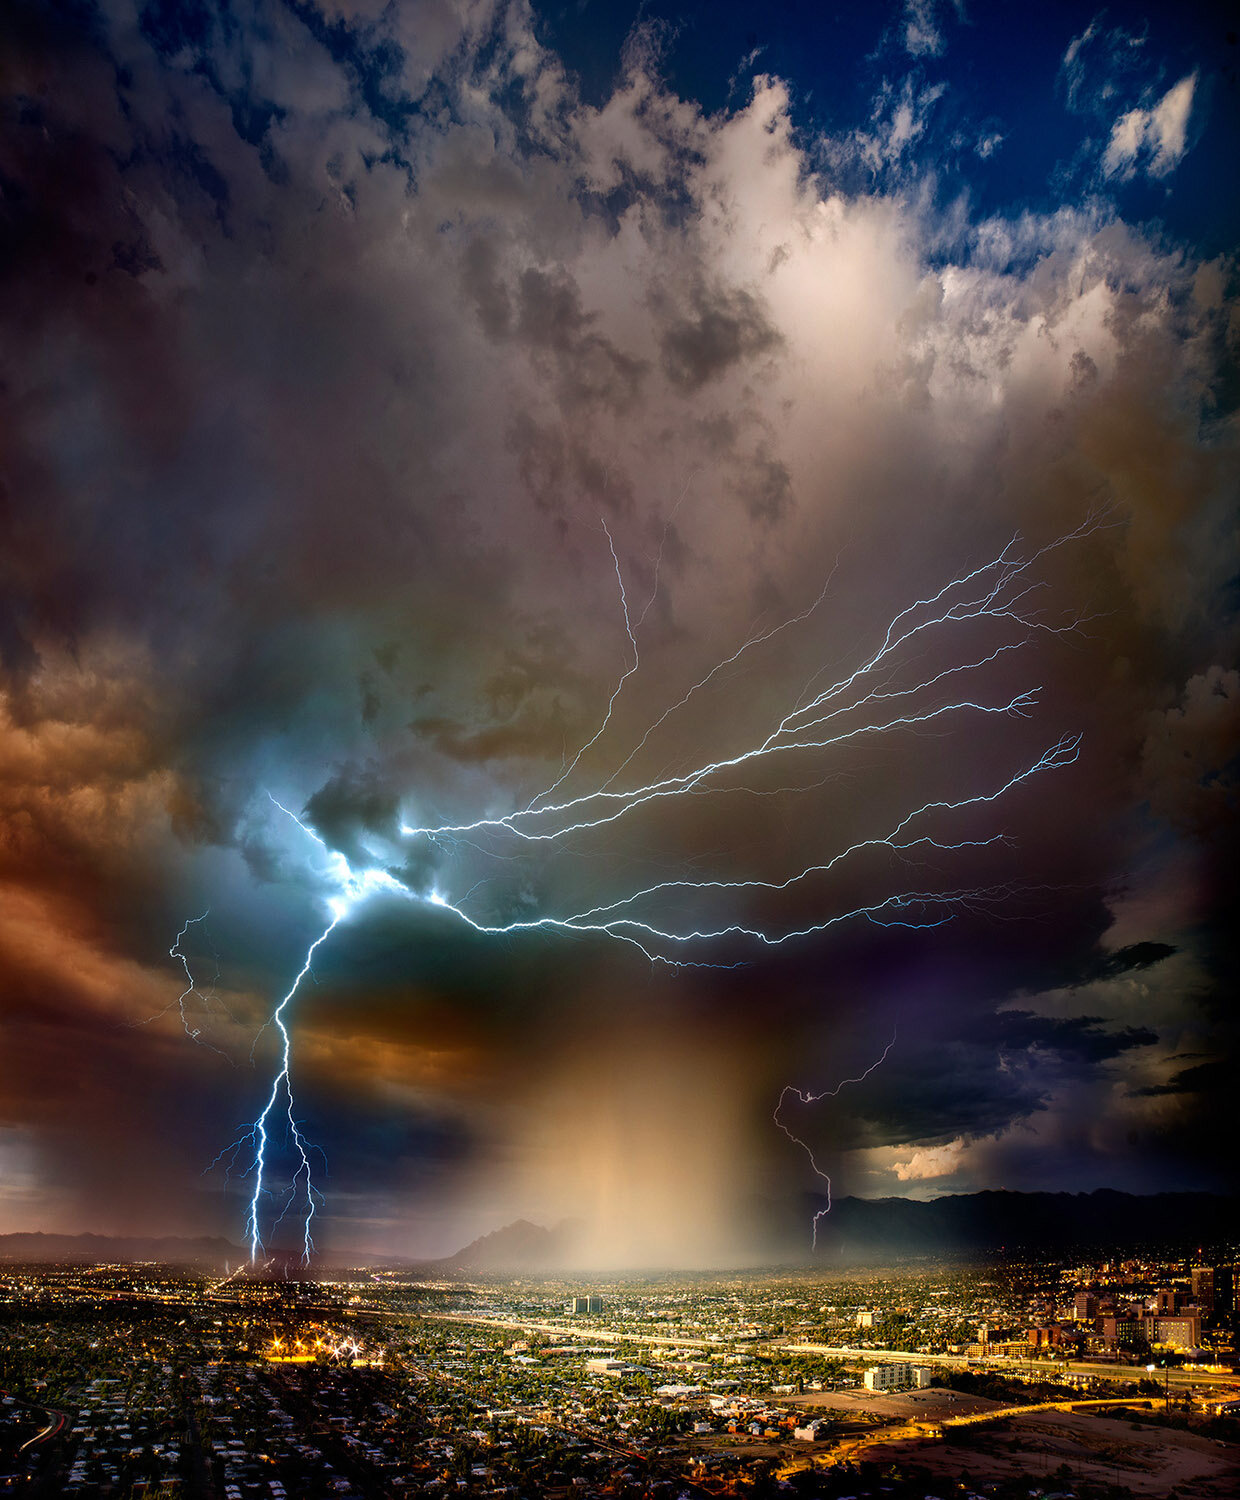 Lightstorm over Tucson, 4 Hour Timelapse Color Montage from A-Mountain, second version